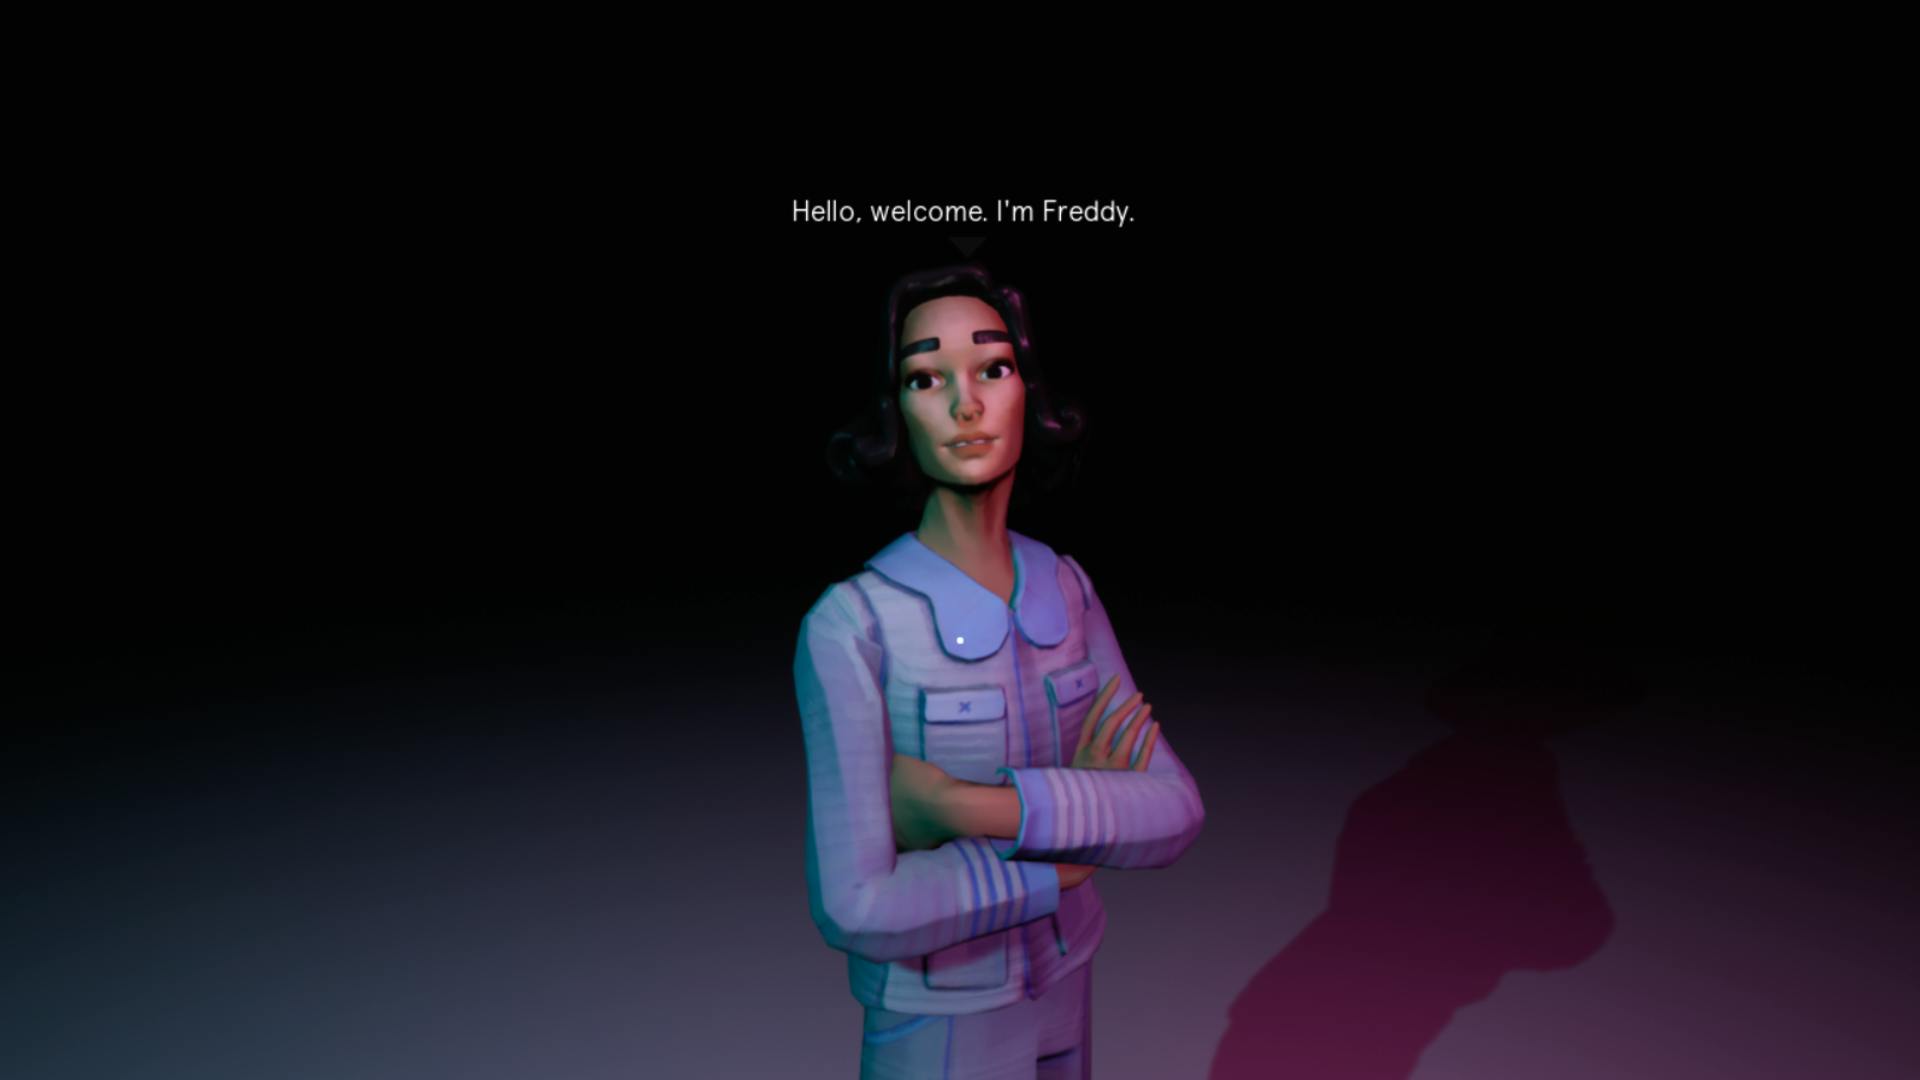 3D game avatar of a woman in a blue suit, spotlit, against a dark background. Over her head is a speech bubble, reading "Hello. Welcome. I'm Freddy". 